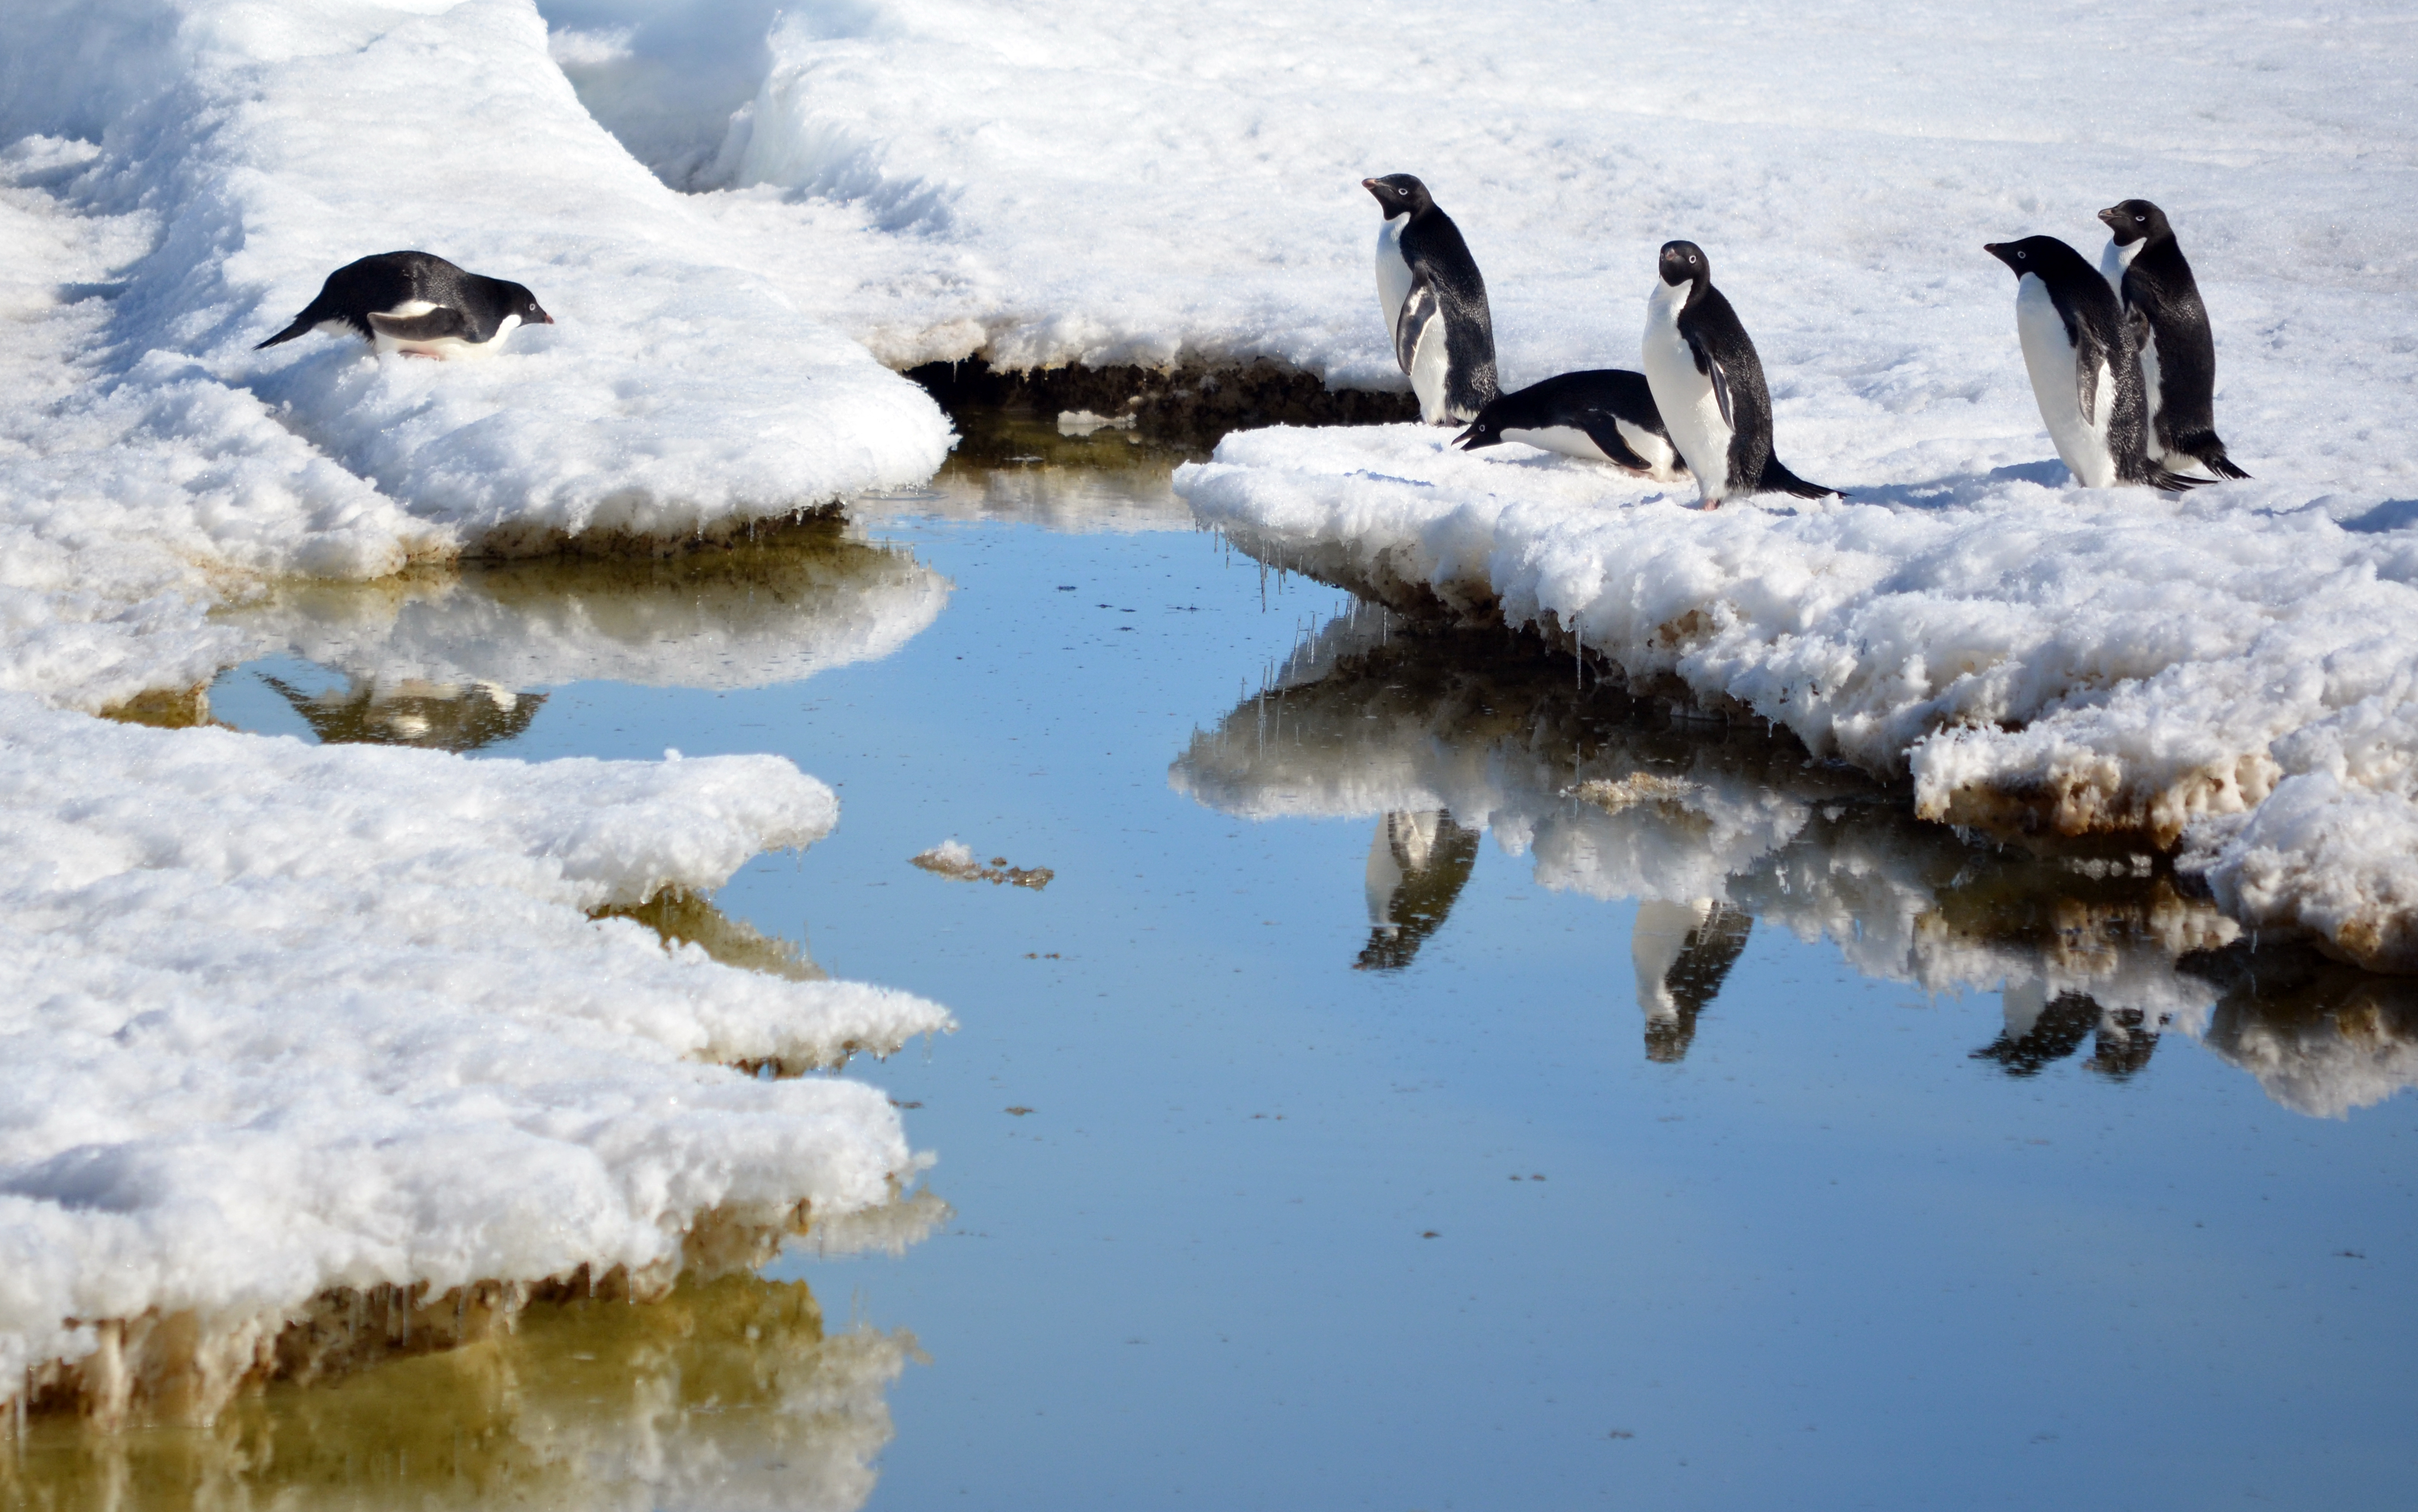 Penguins stand on ice near water.